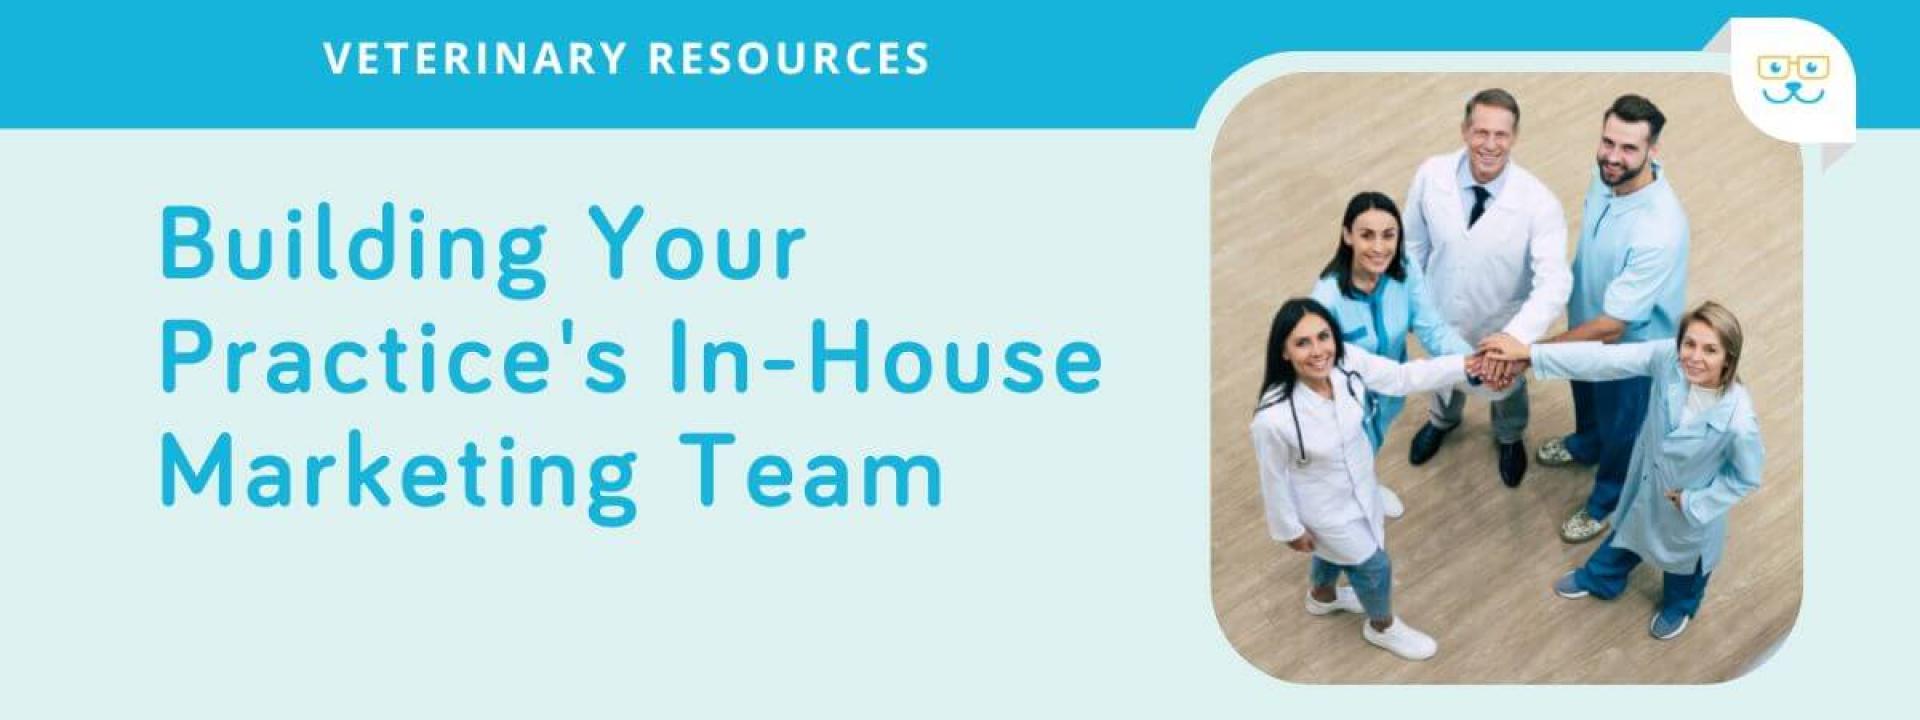 Building Your Practice’s In-House Marketing Team